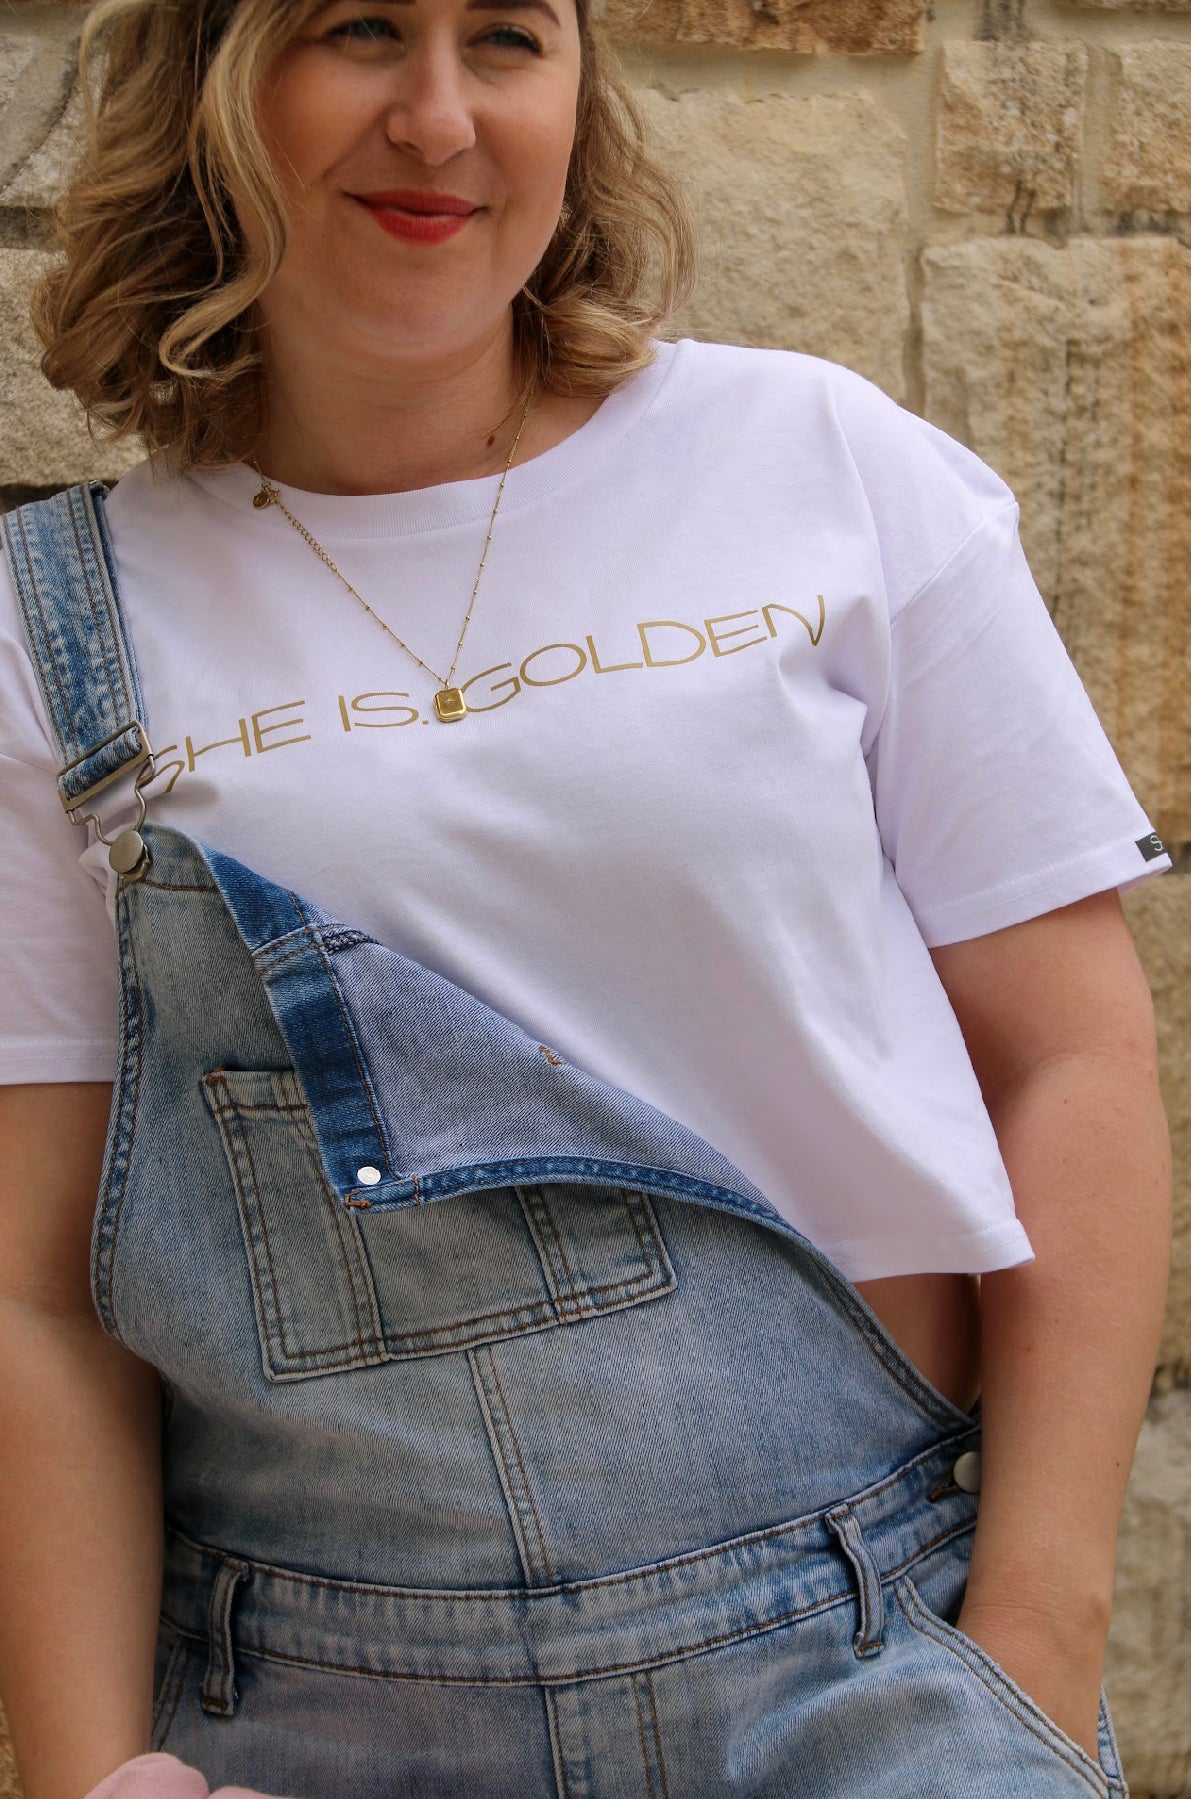 SHE IS. GOLDEN Cropped Tee